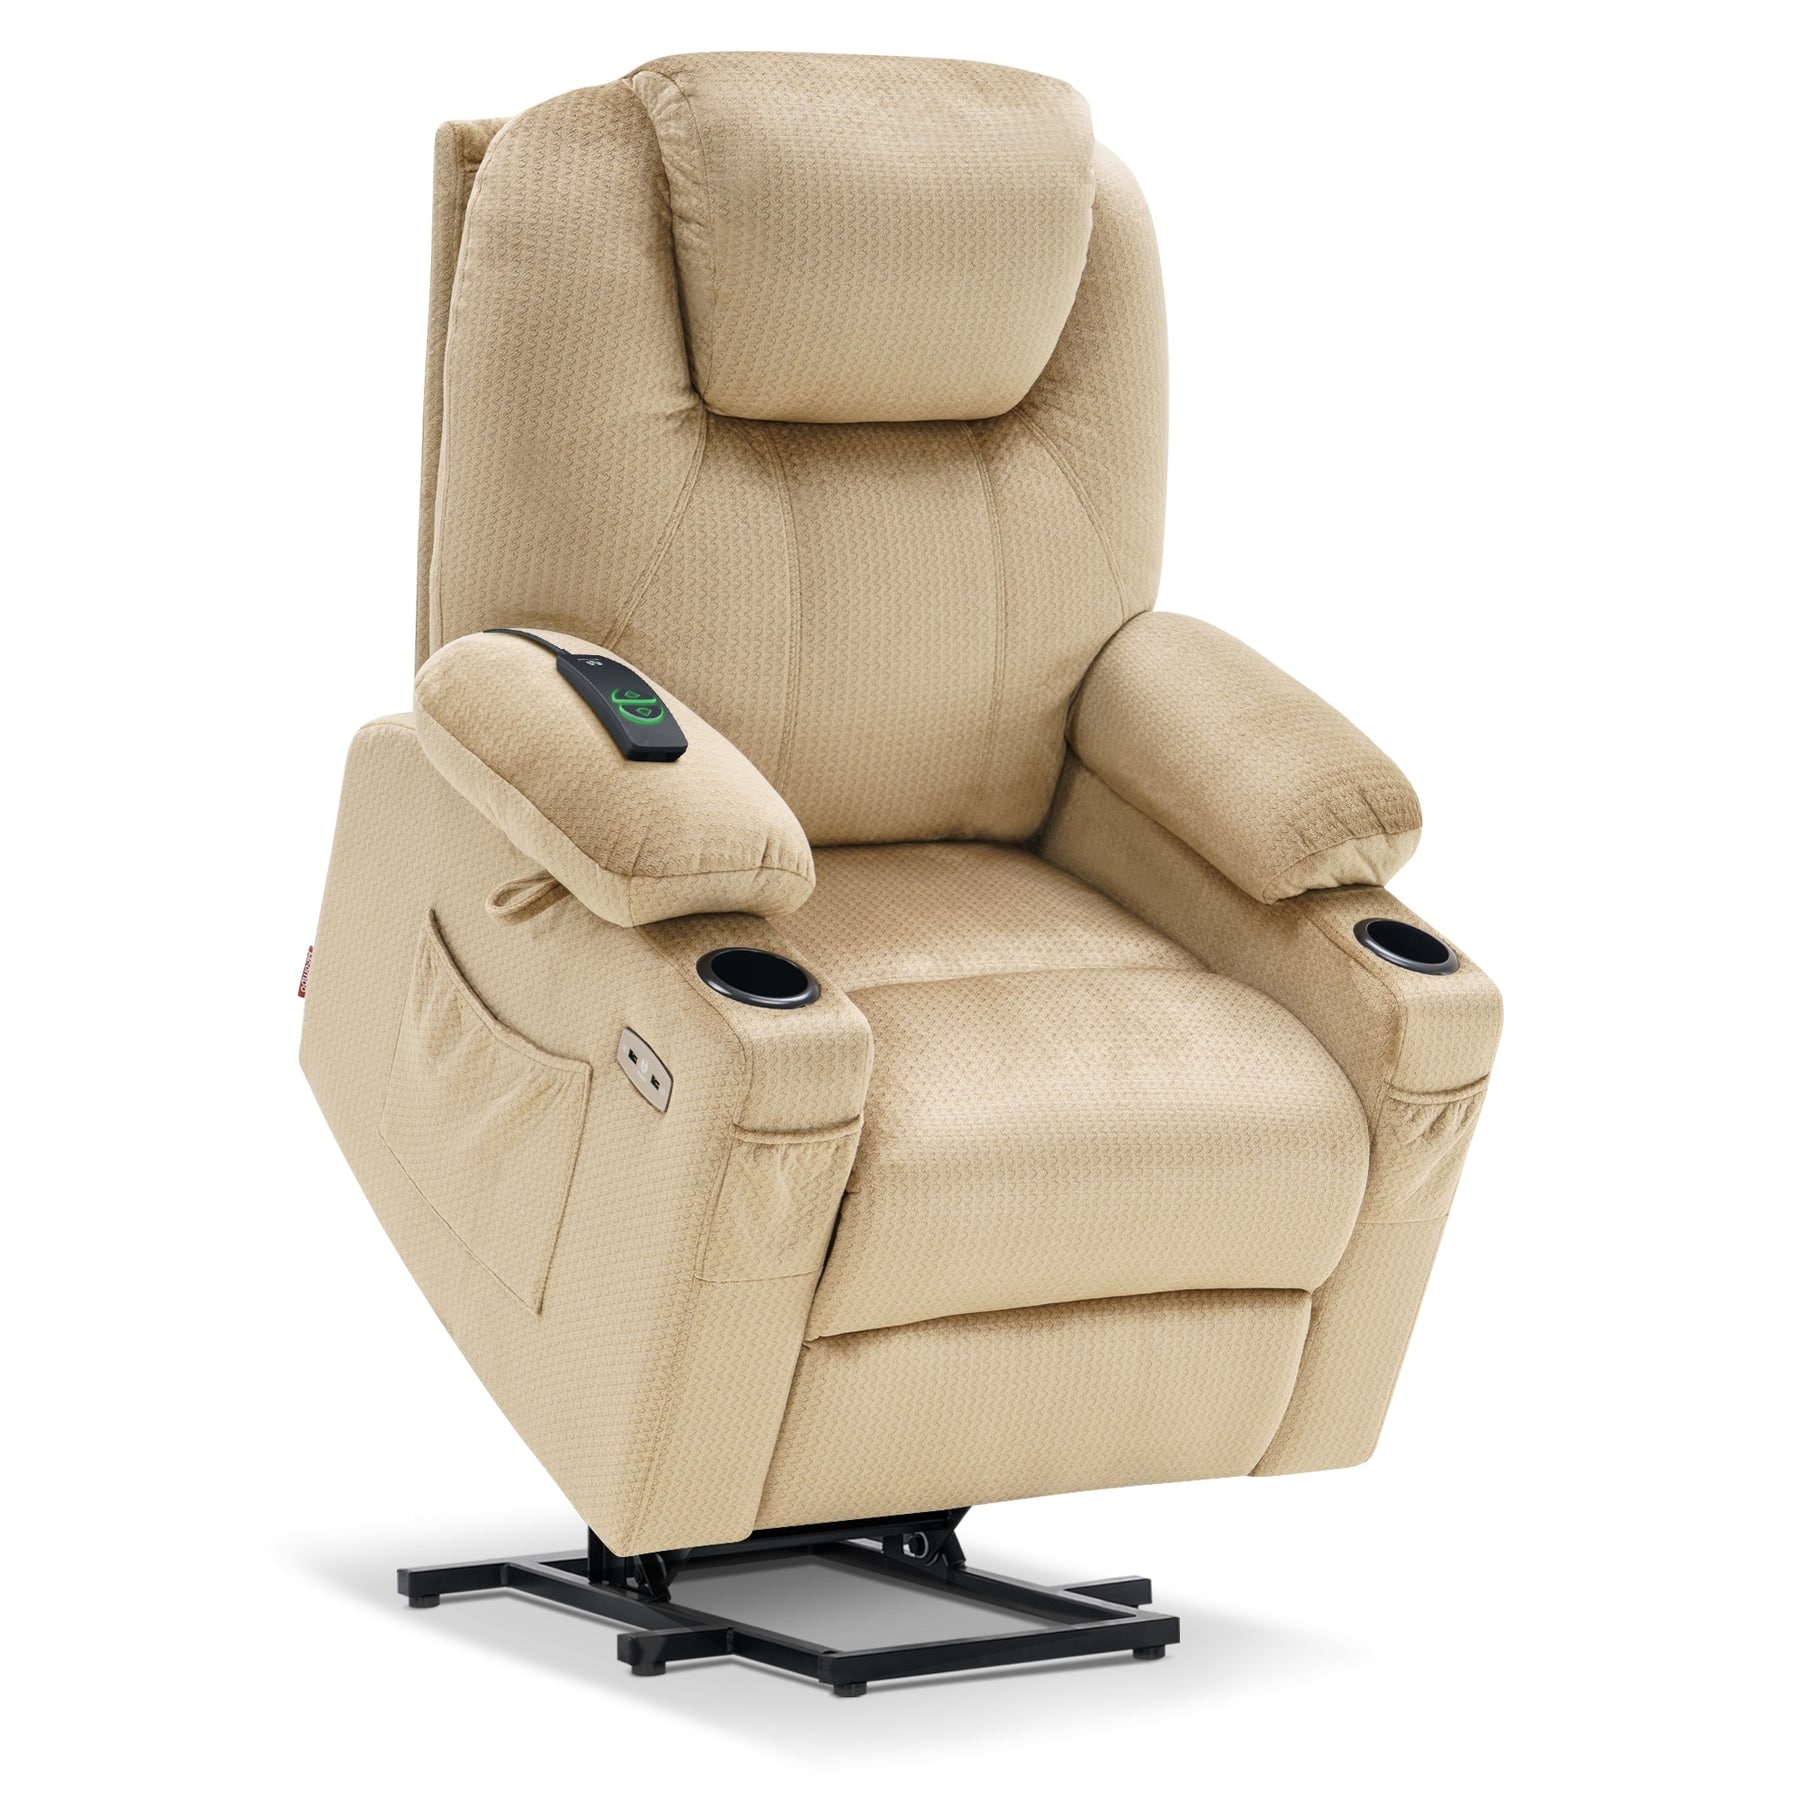 https://ak1.ostkcdn.com/images/products/is/images/direct/d7361243c6f4ffdb6bc14b53abba6b6b1ff63b52/Large-Power-Lift-Recliner-Chair-Sofa-with-Massage%2C-Heat-for-Big-and-Tall-People%2C-Cup-Holders%2CExtended-Footrest%2C-Fabric-7516.jpg